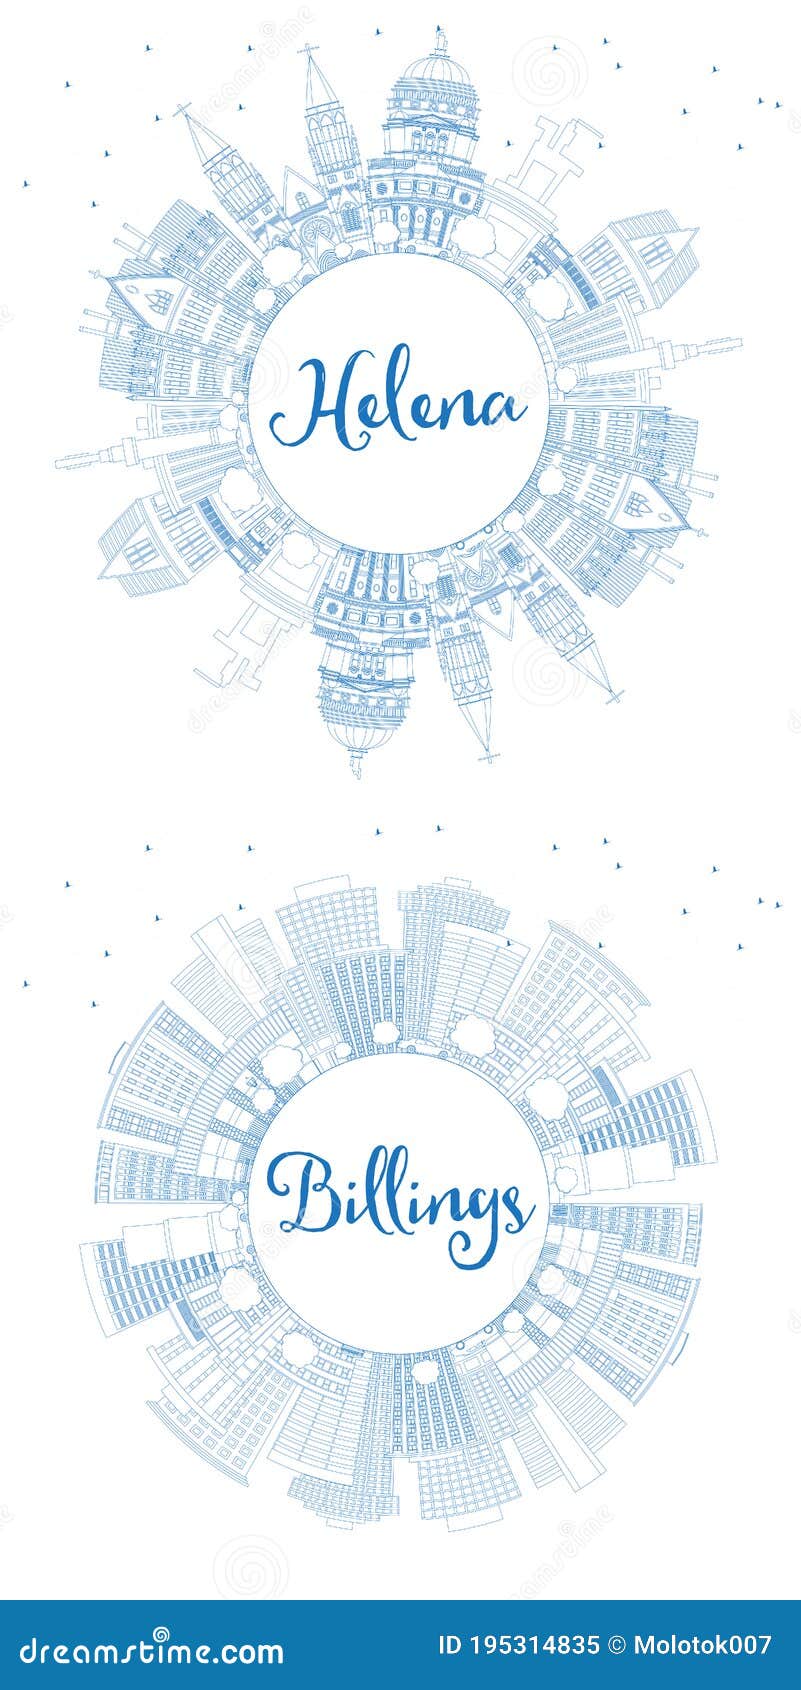 outline billings and helena montana city skylines set with blue buildings and copy space